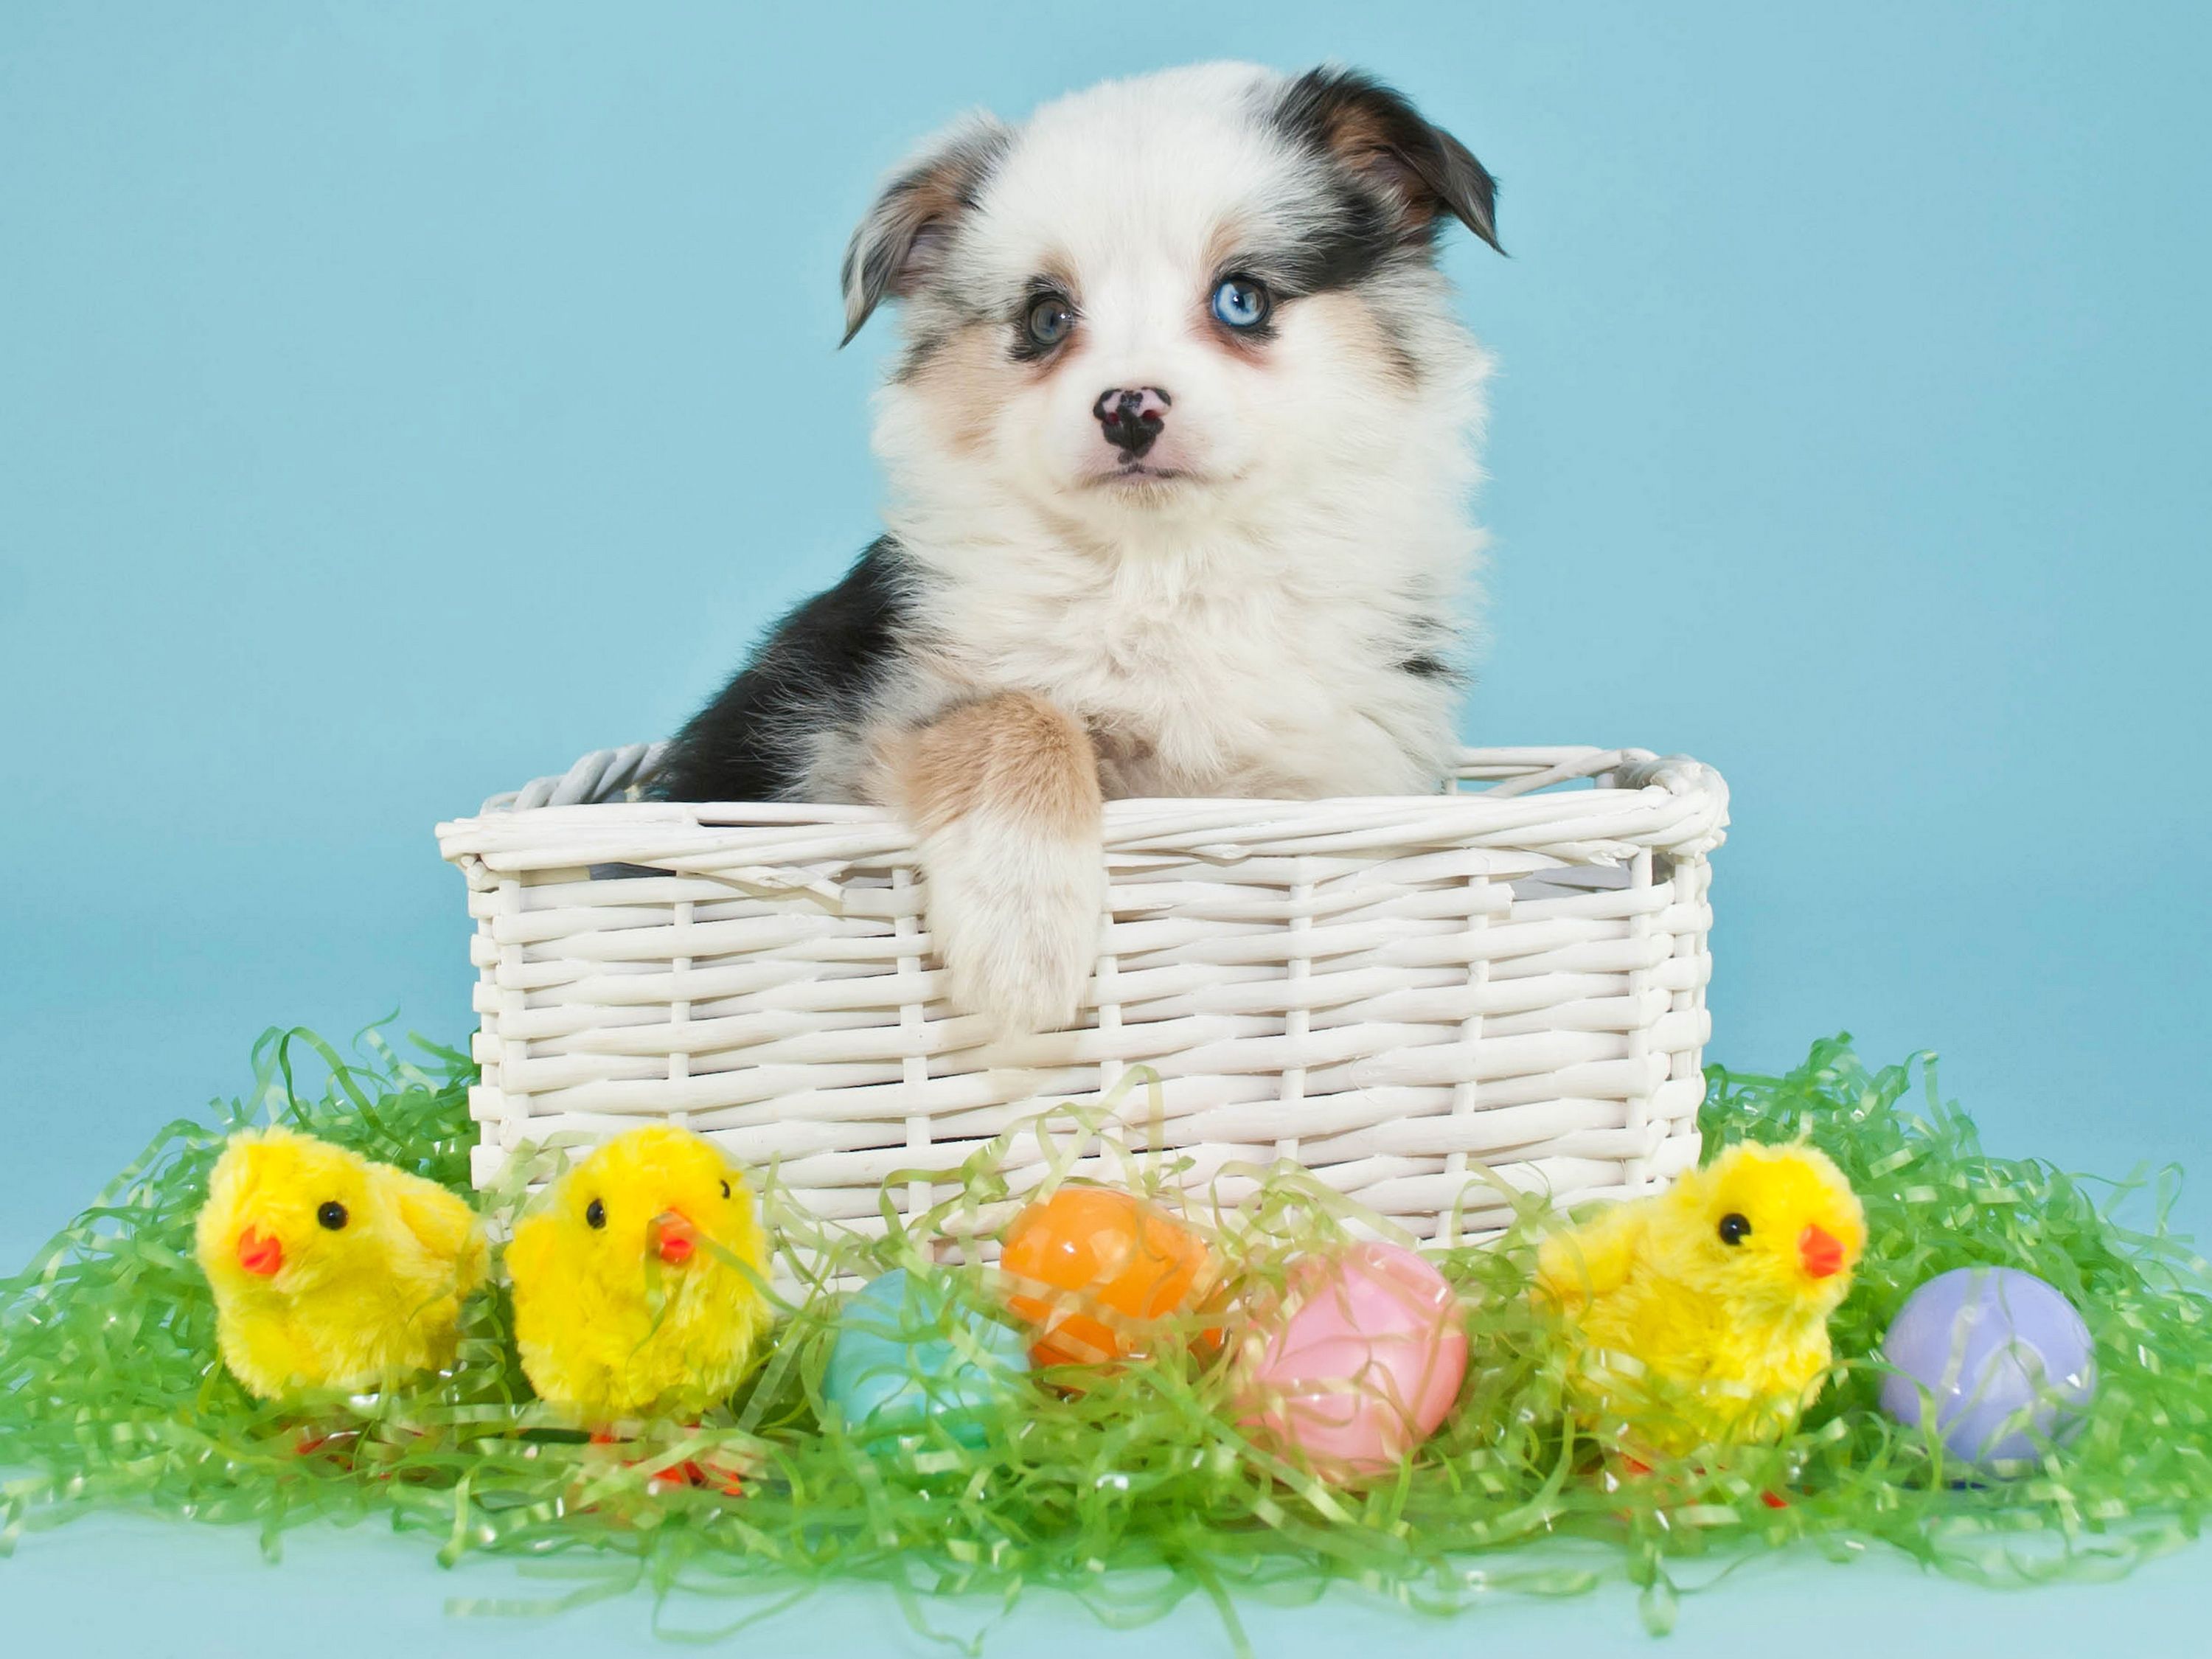 Image Easter puppies dog Chicks Eggs Wicker basket animal 3000x2250